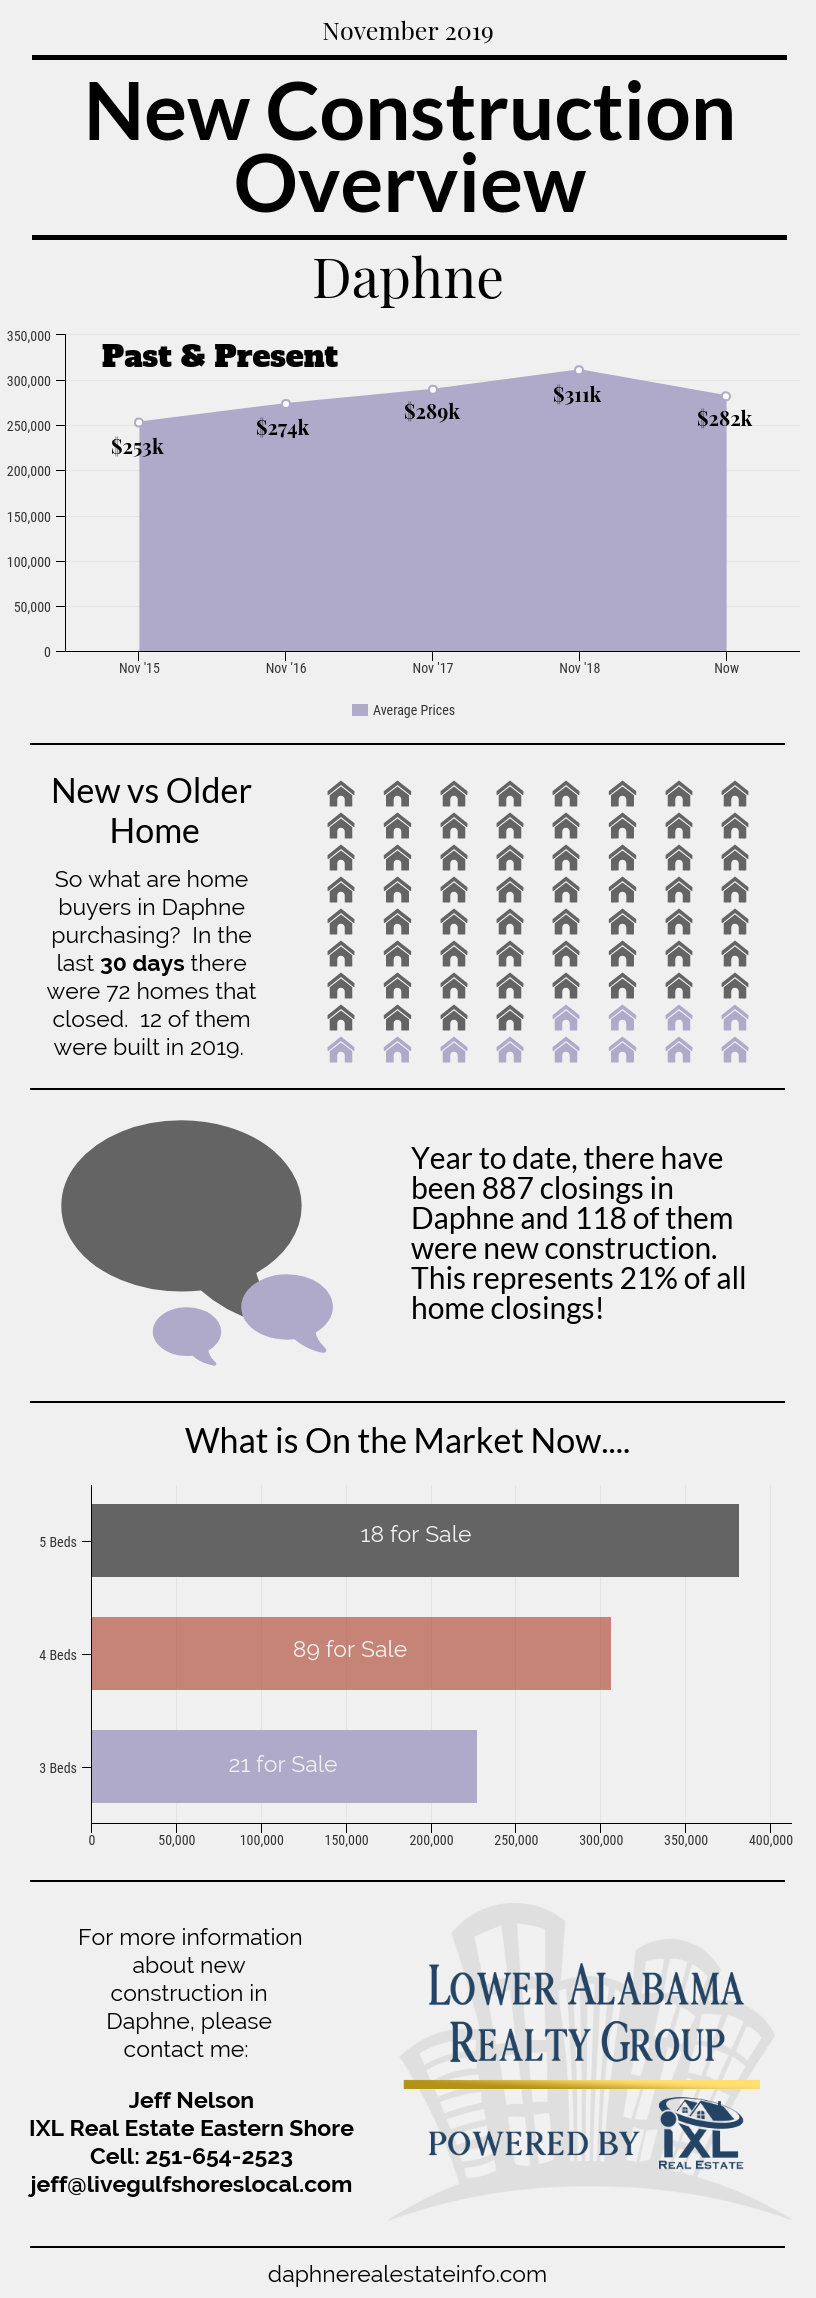 Infographic - New Construction Overview in Daphne - Nov 2019